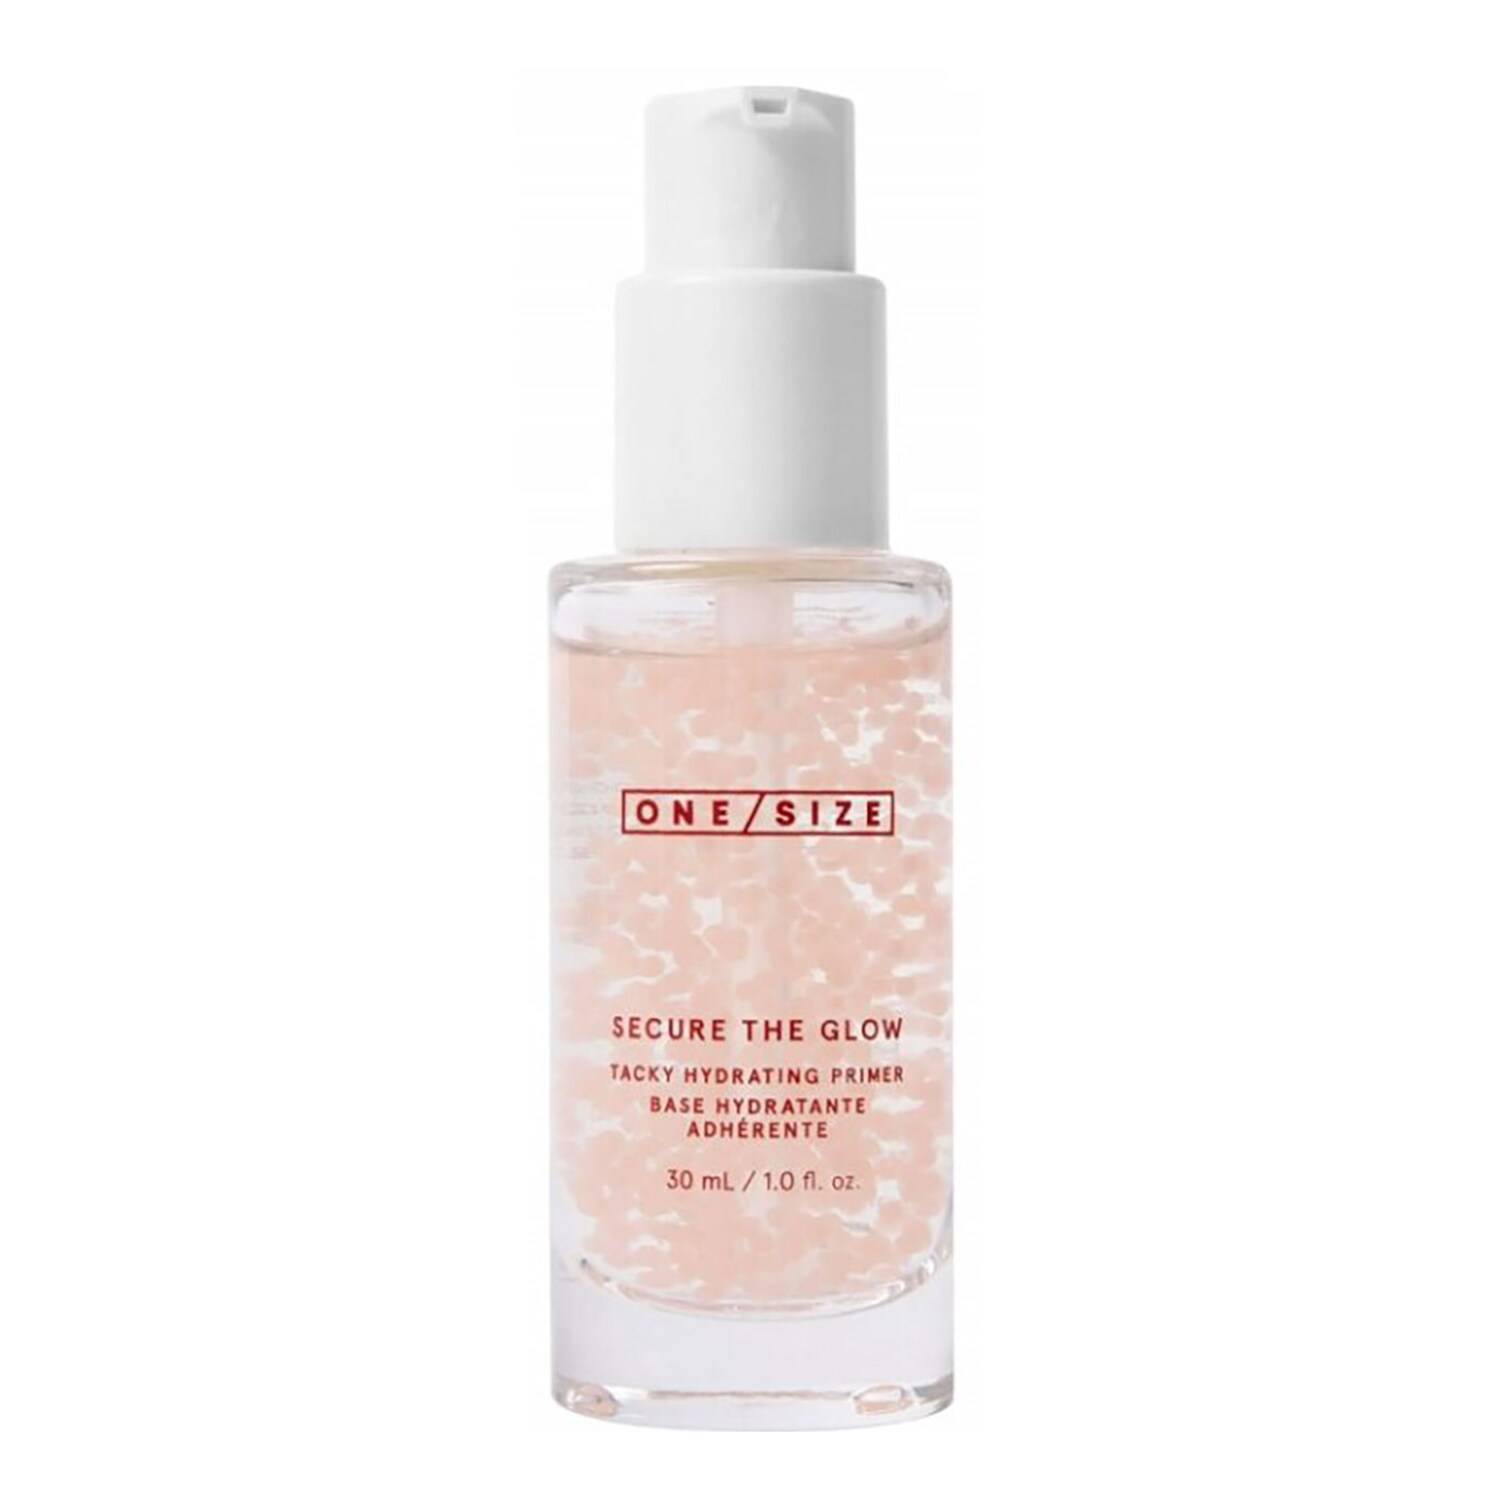 Onesize Secure The Glow Tacky Hydrating Primer 30Ml